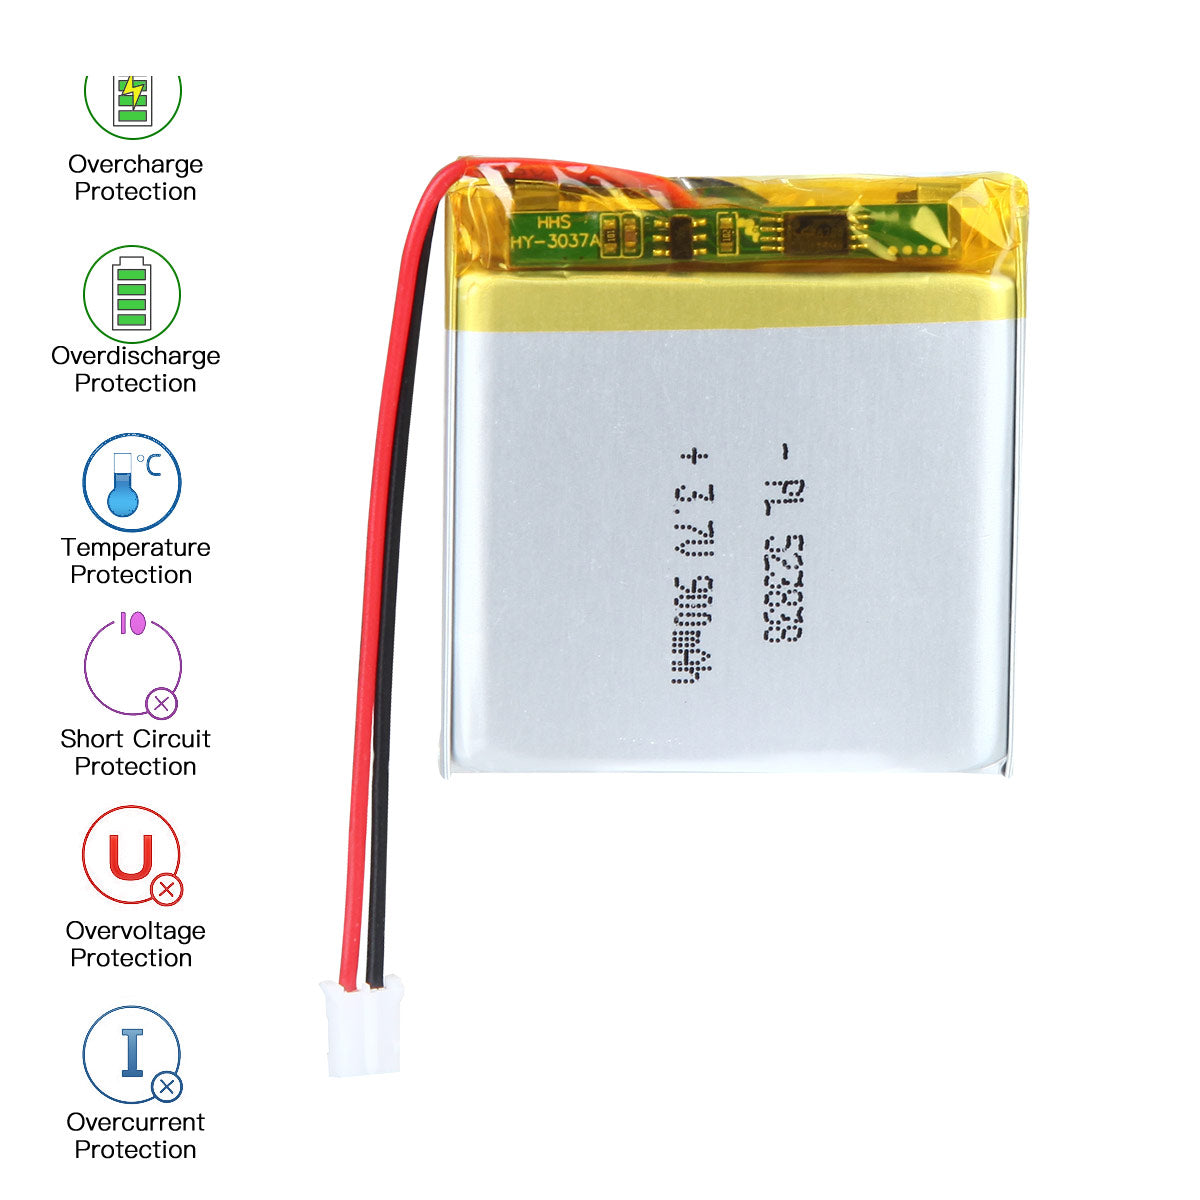 YDL 3.7V 900mAh 523838 Rechargeable Lithium Polymer Battery Length 40mm